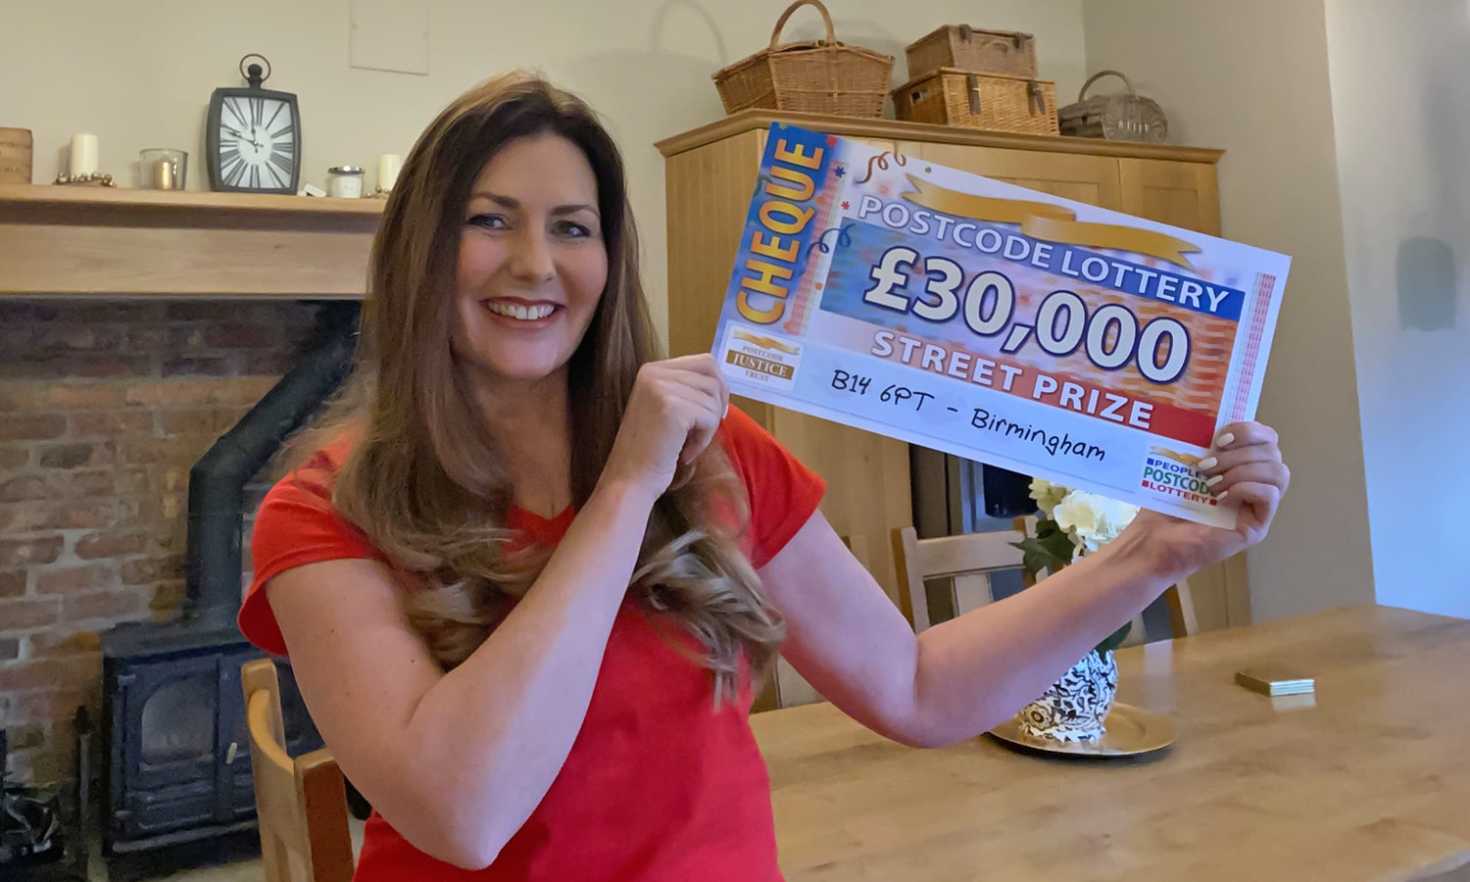 Judie has a fabulous £30,000 cheque for each of our lucky winners in Birmingham